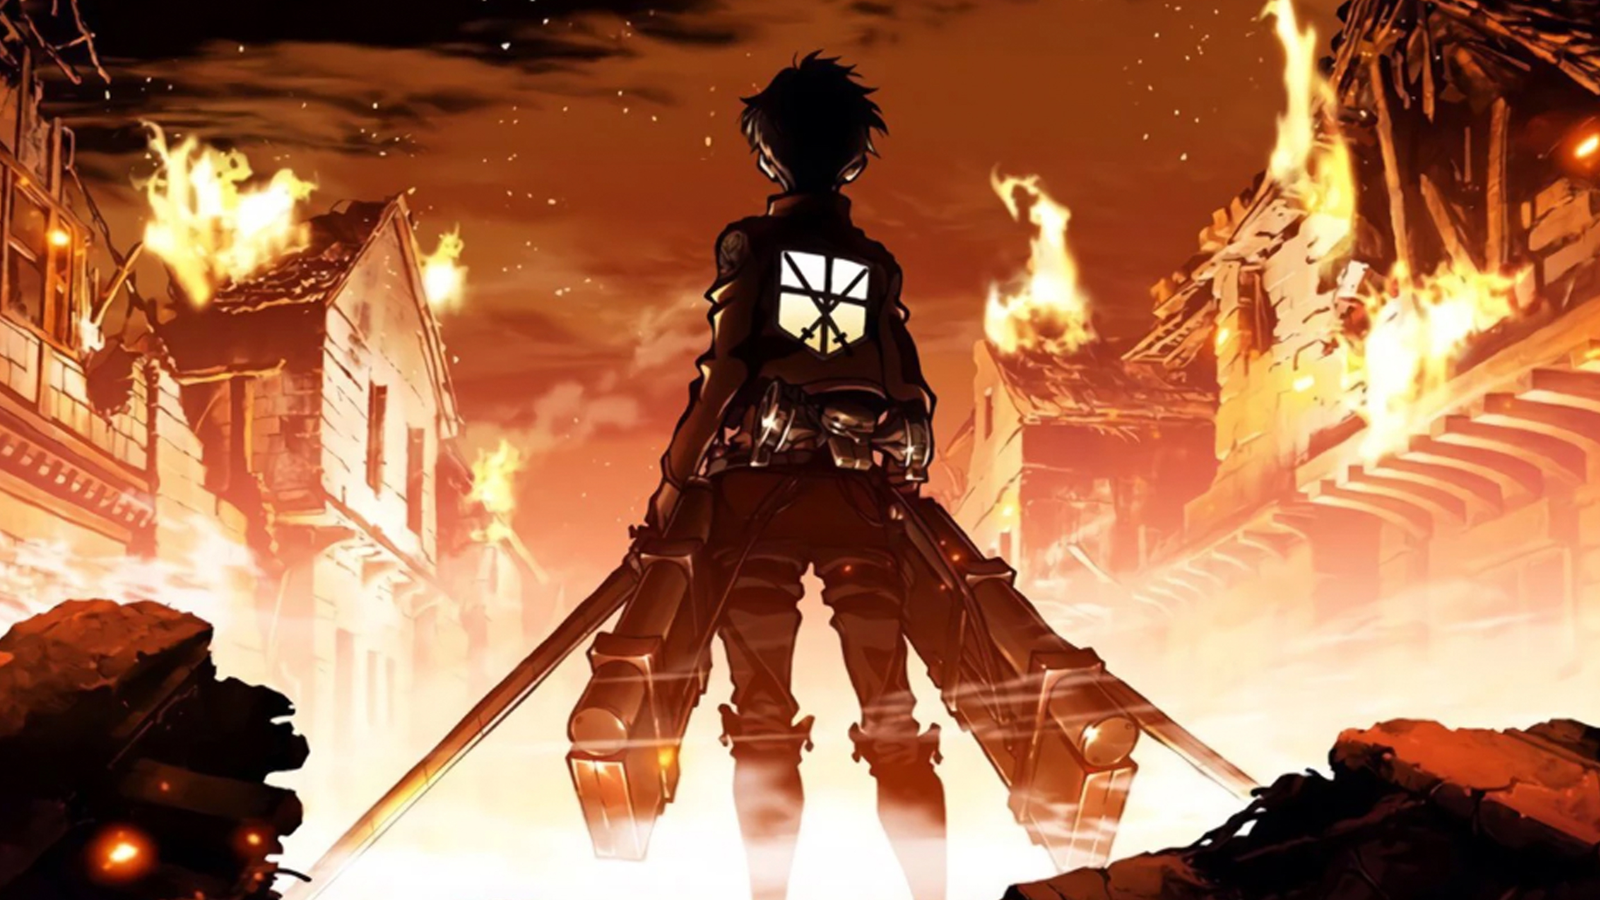 Attack on Titan Watch order: Read before starting the series